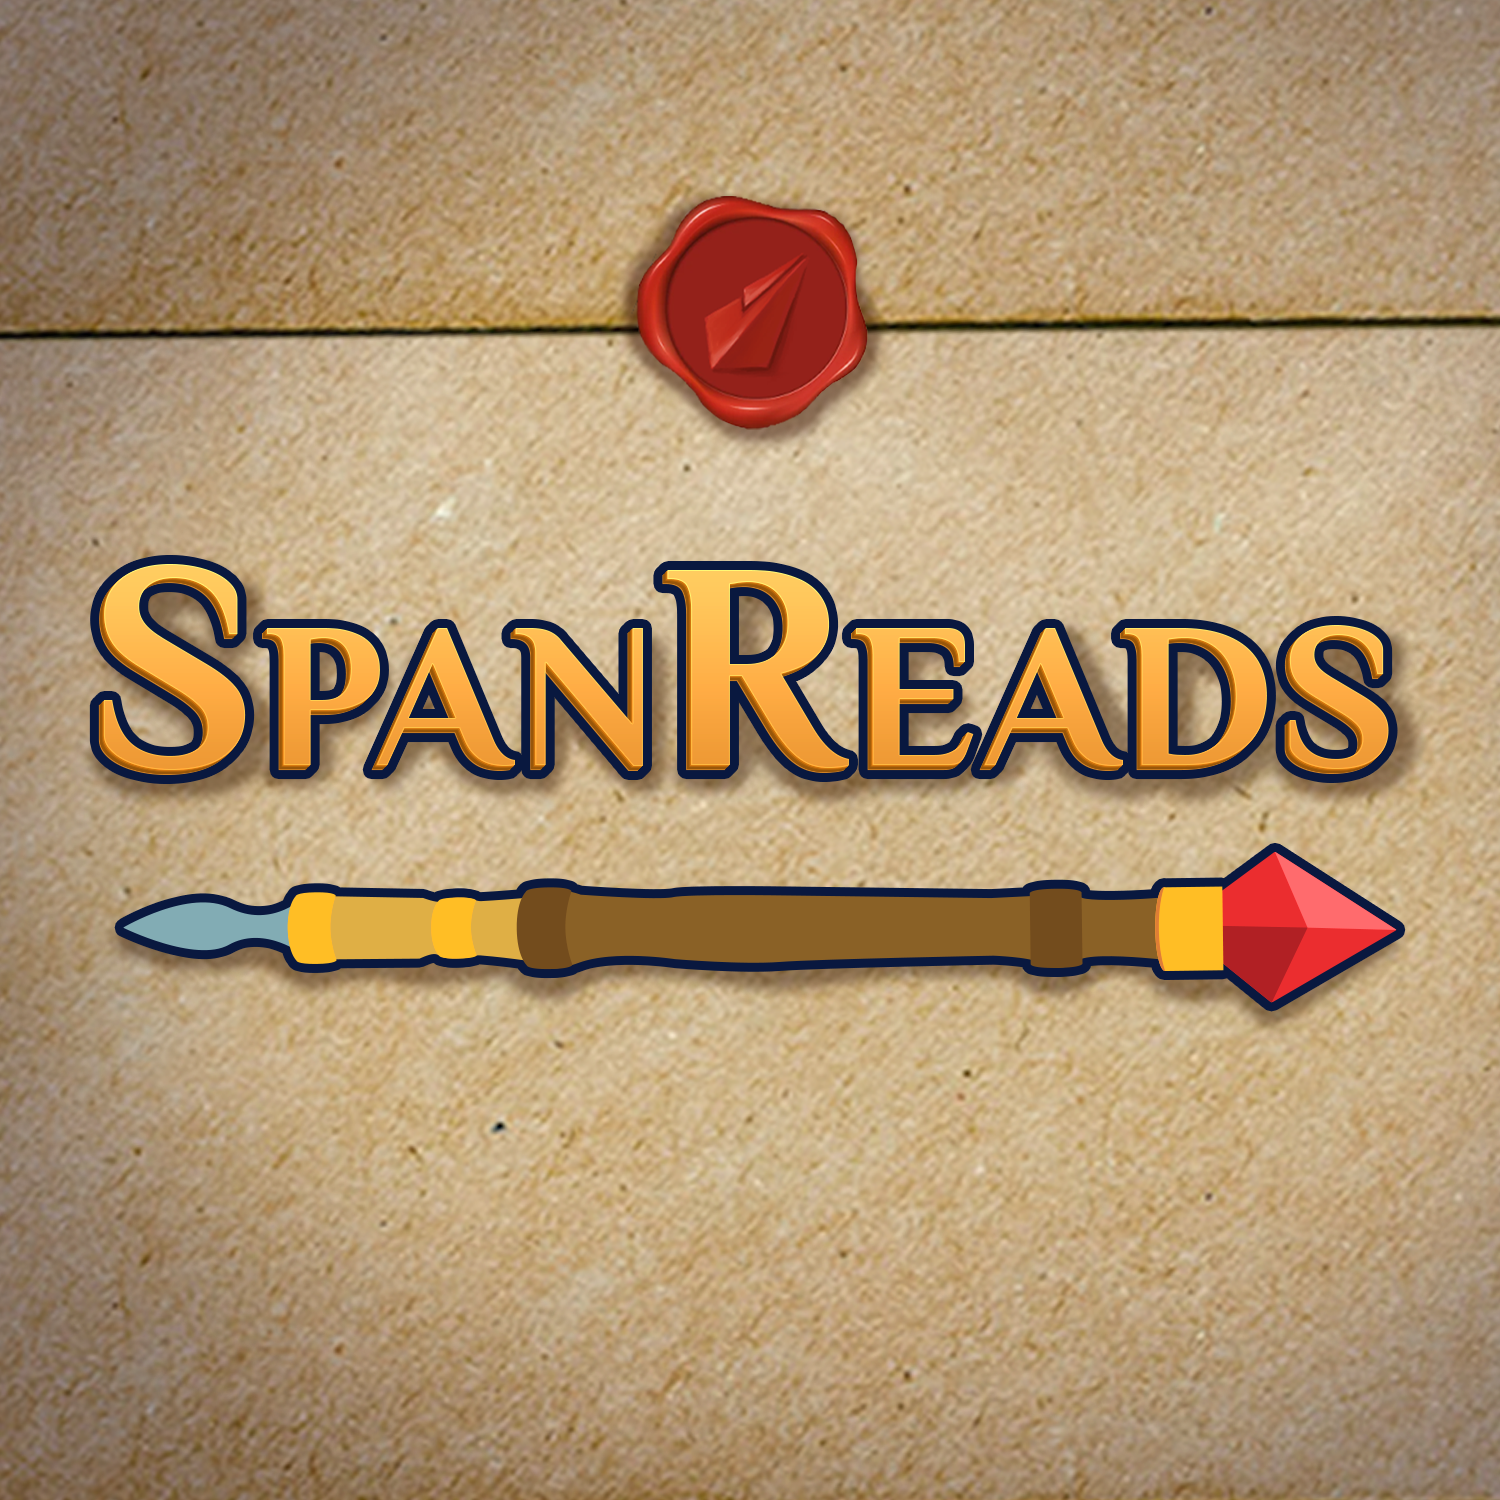 More information about "SpanReads: Skyward - Lore"